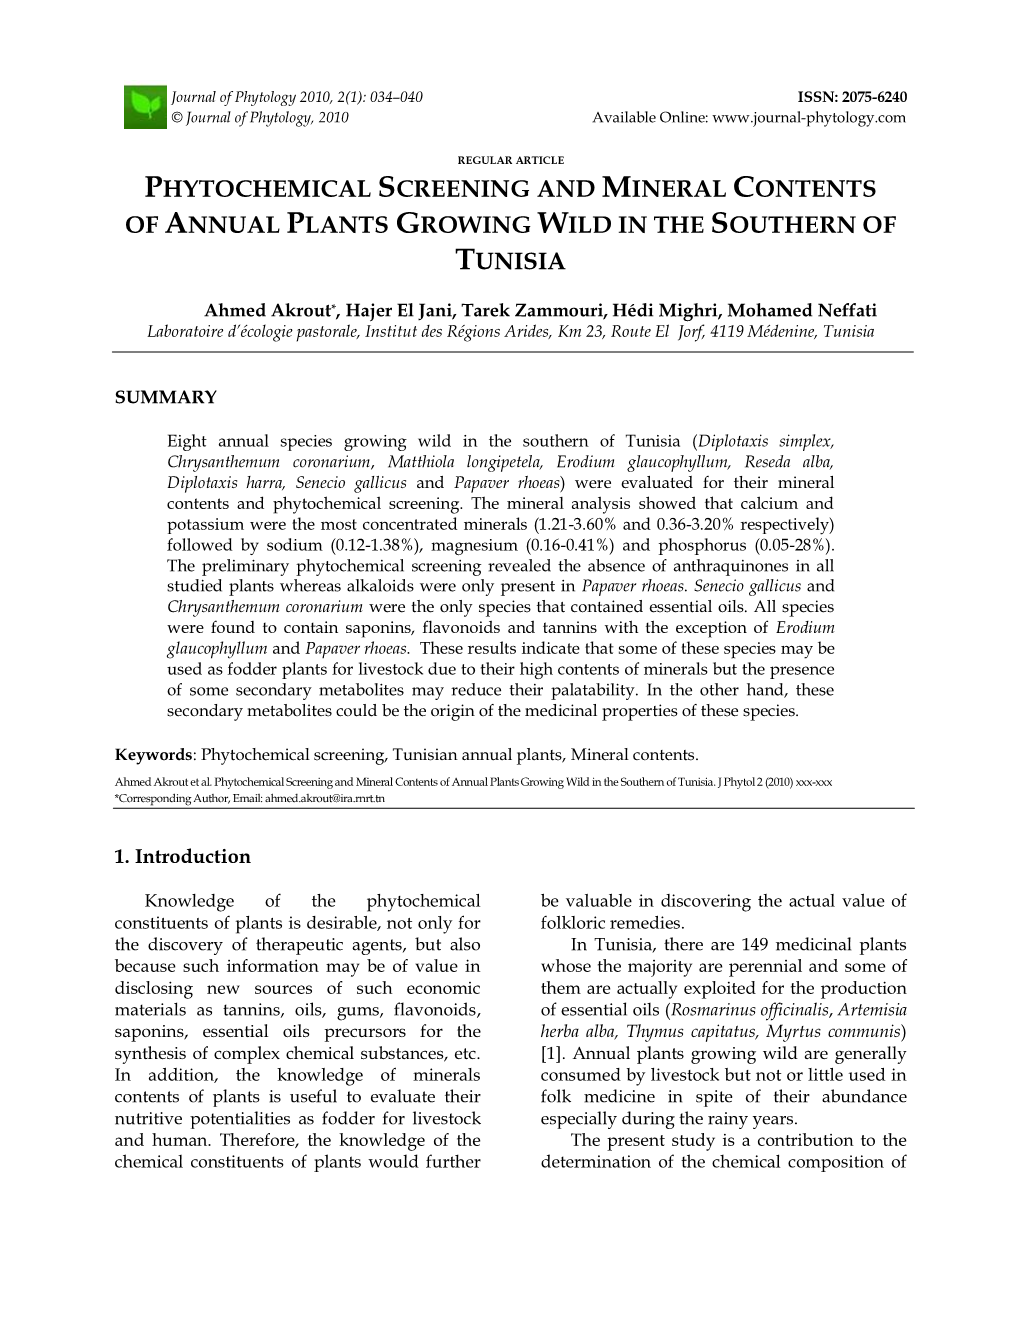 Phytochemical Screening and Mineral Contents of Annual Plants Growing Wild in the Southern of Tunisia